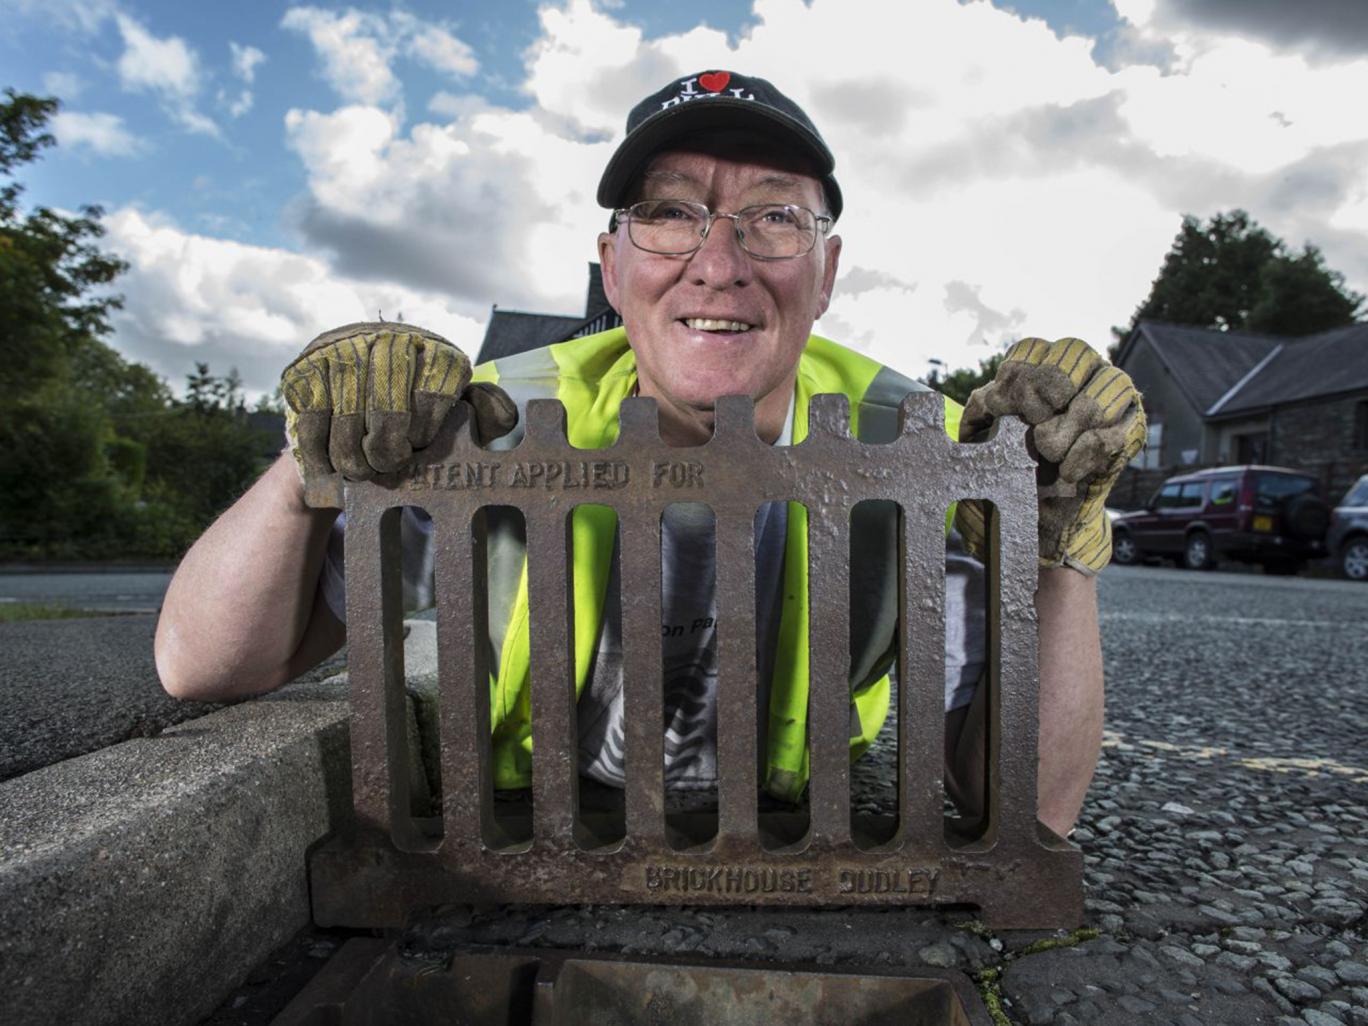 Archie Workman, our drainspotter, in the news this morning